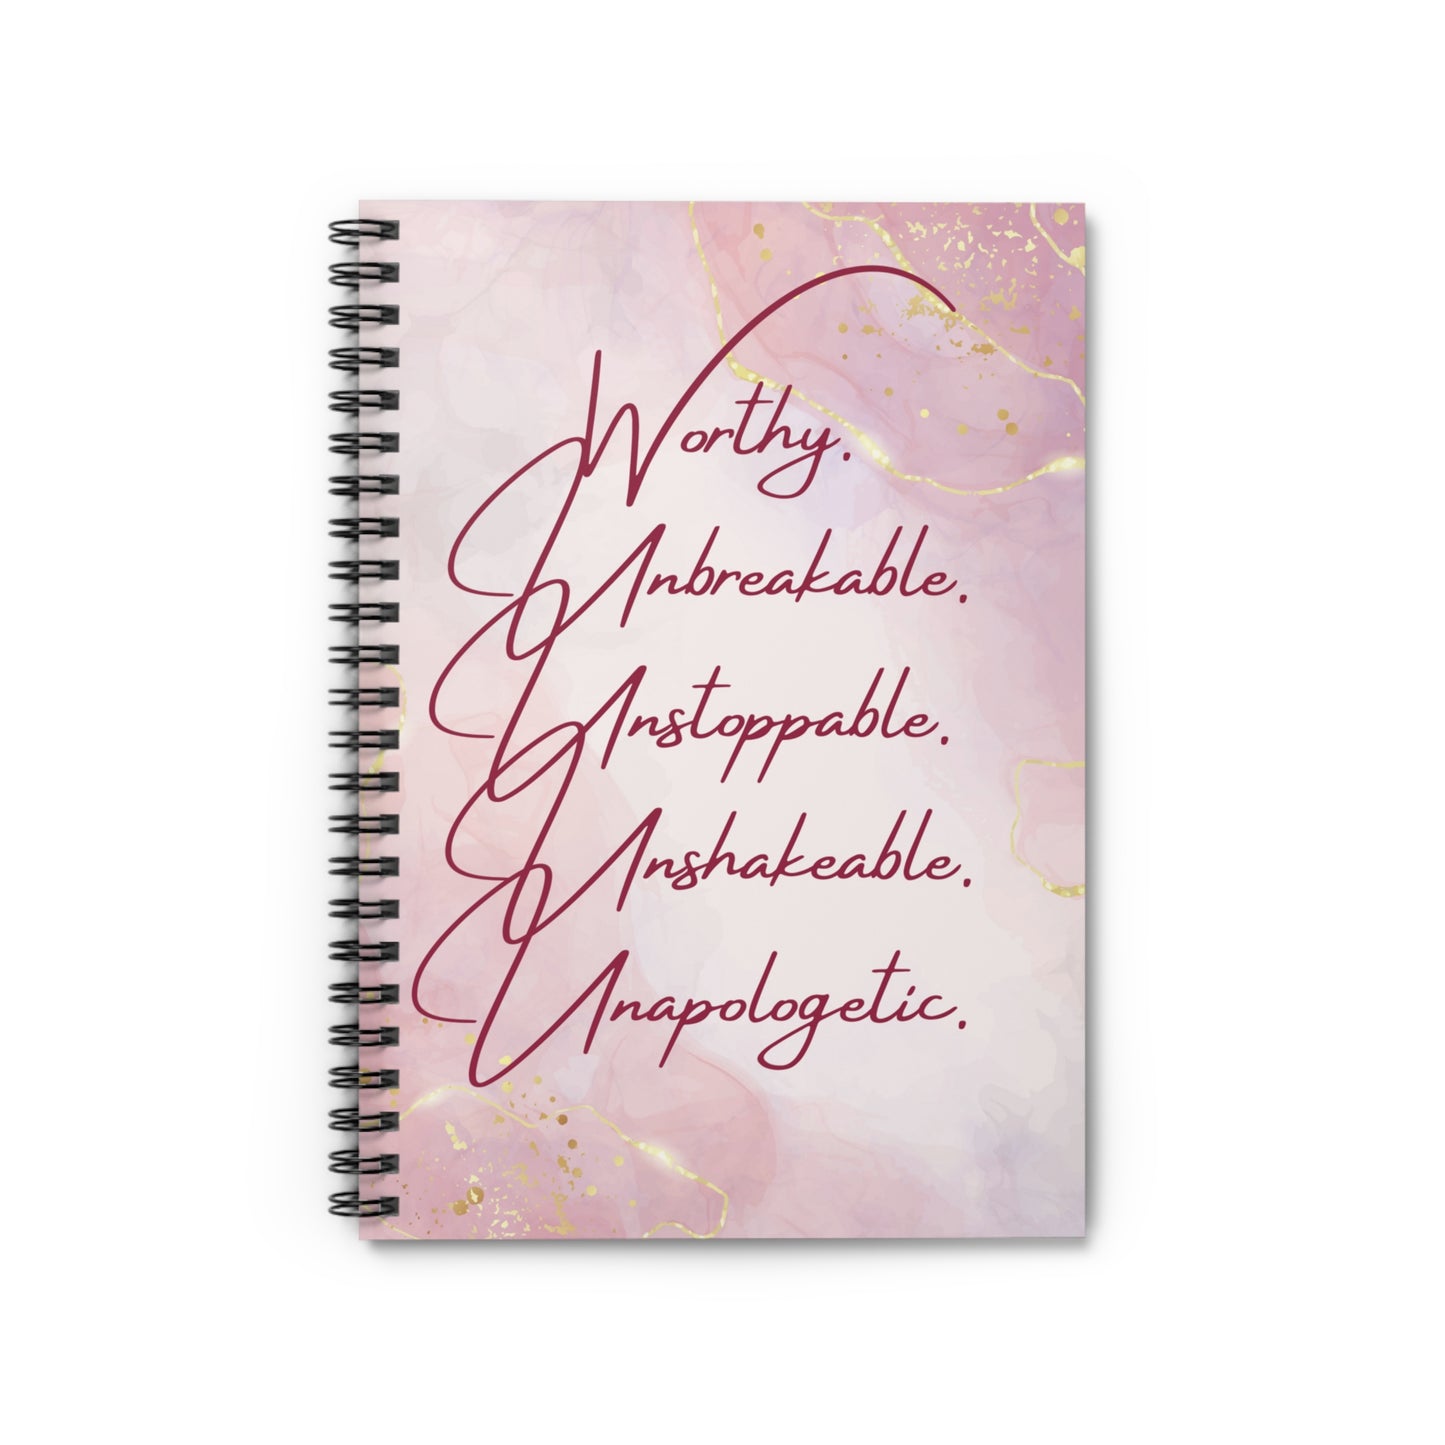 Affirmed - Worthy, Unbreakable, Unstoppable, Unshakeable, Unapologetic Spiral Notebook